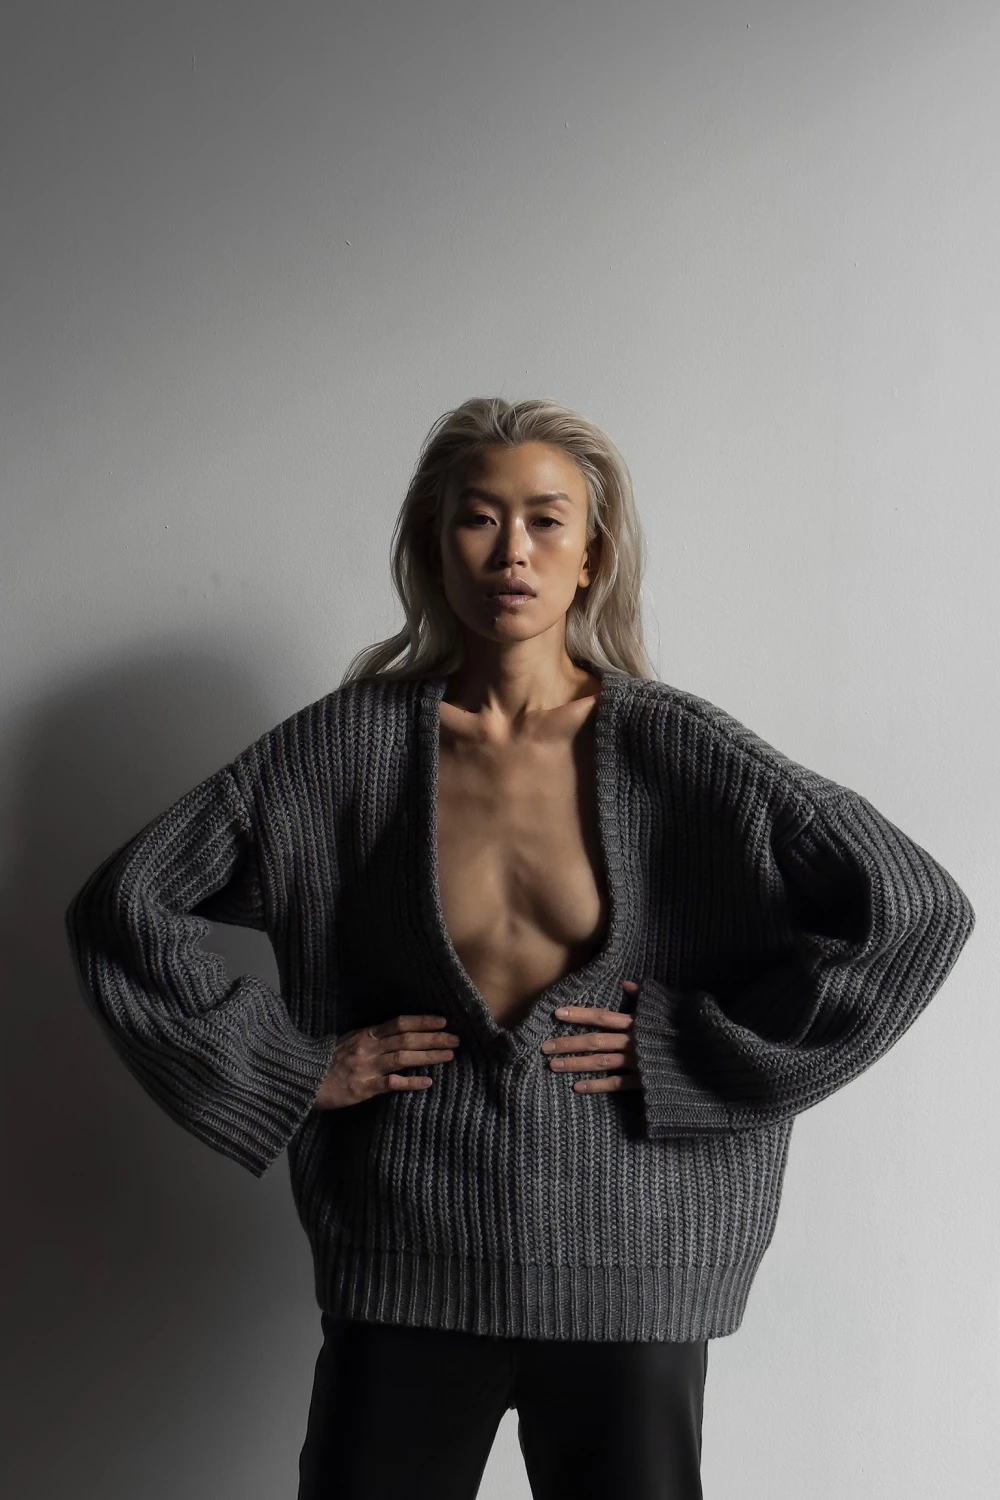 sweater with a deep v-neck sleeve in grey color